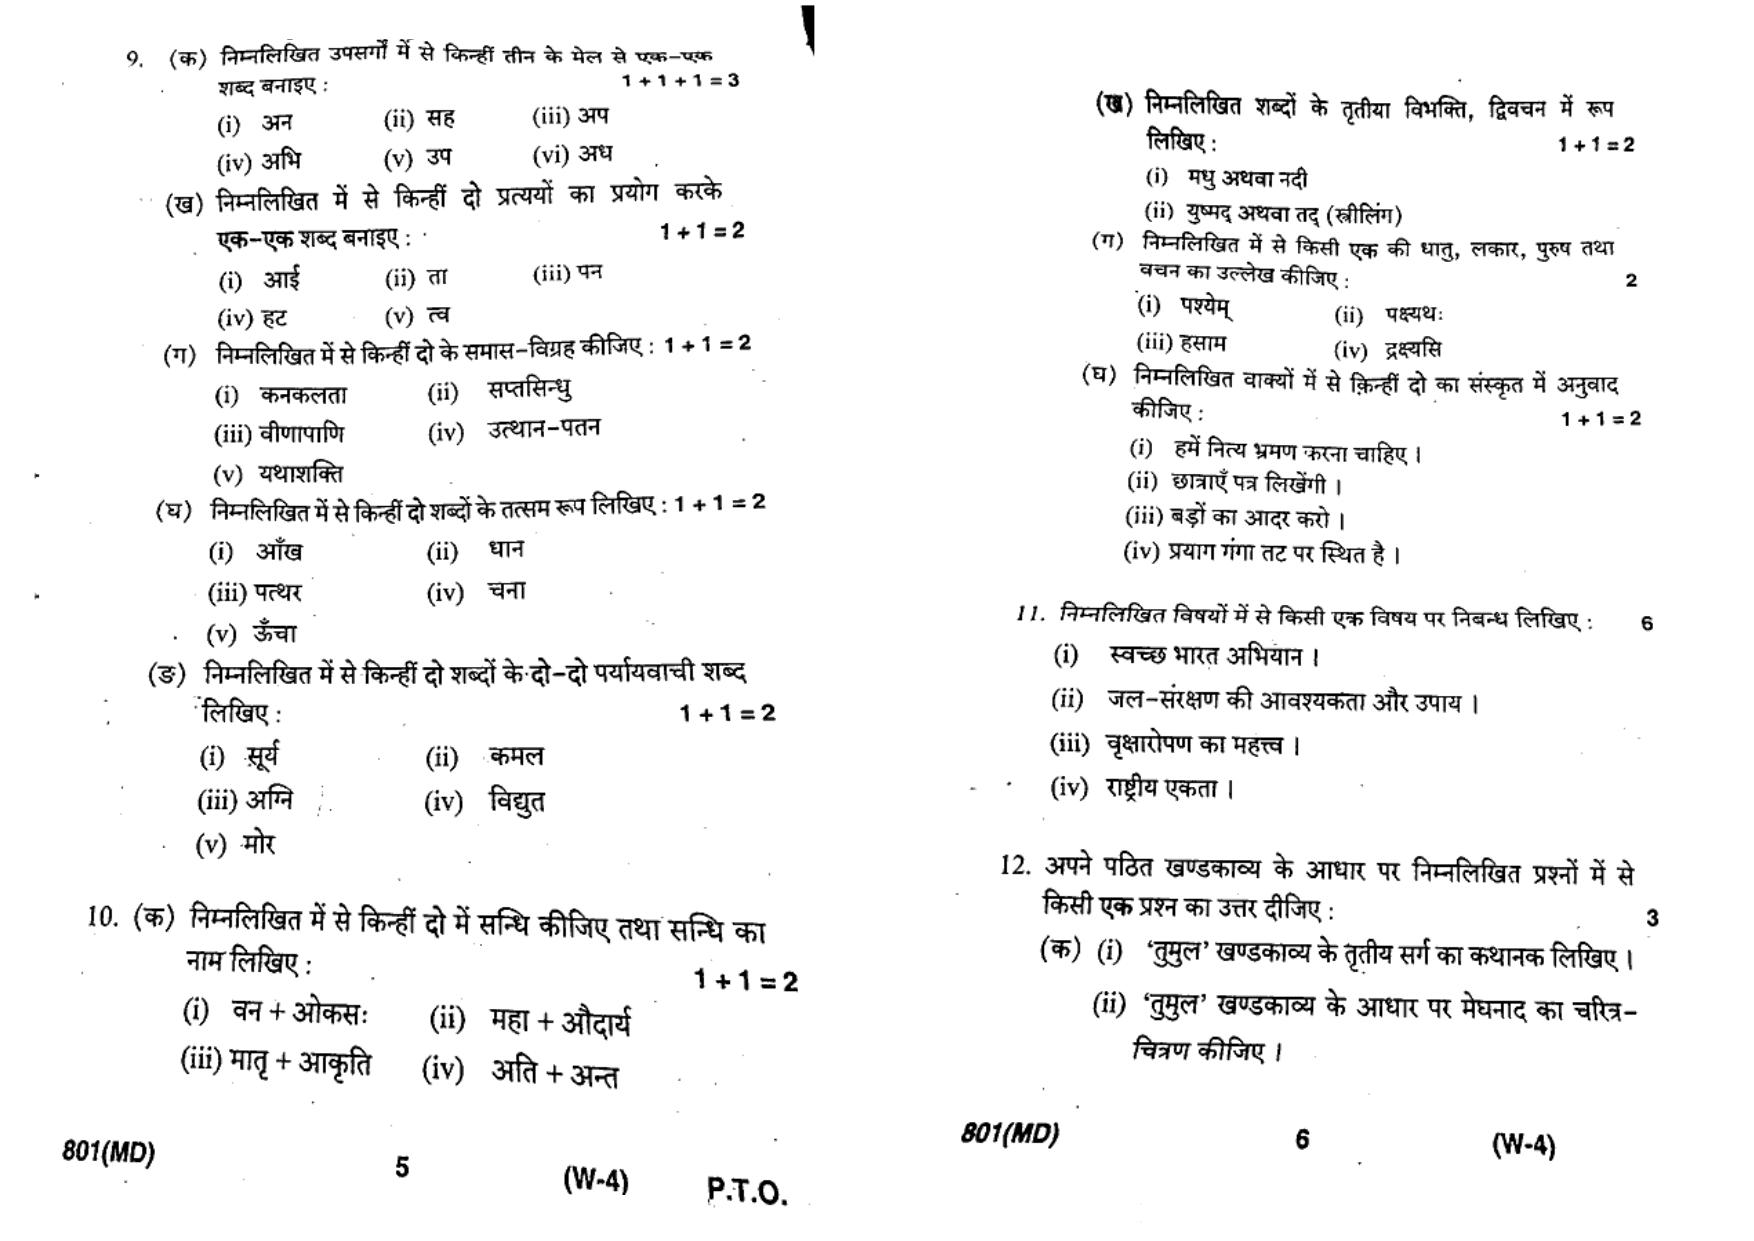 UP Board Previous Year Question Paper Class 10 Hindi (801 MD) – 2020 - Page 3